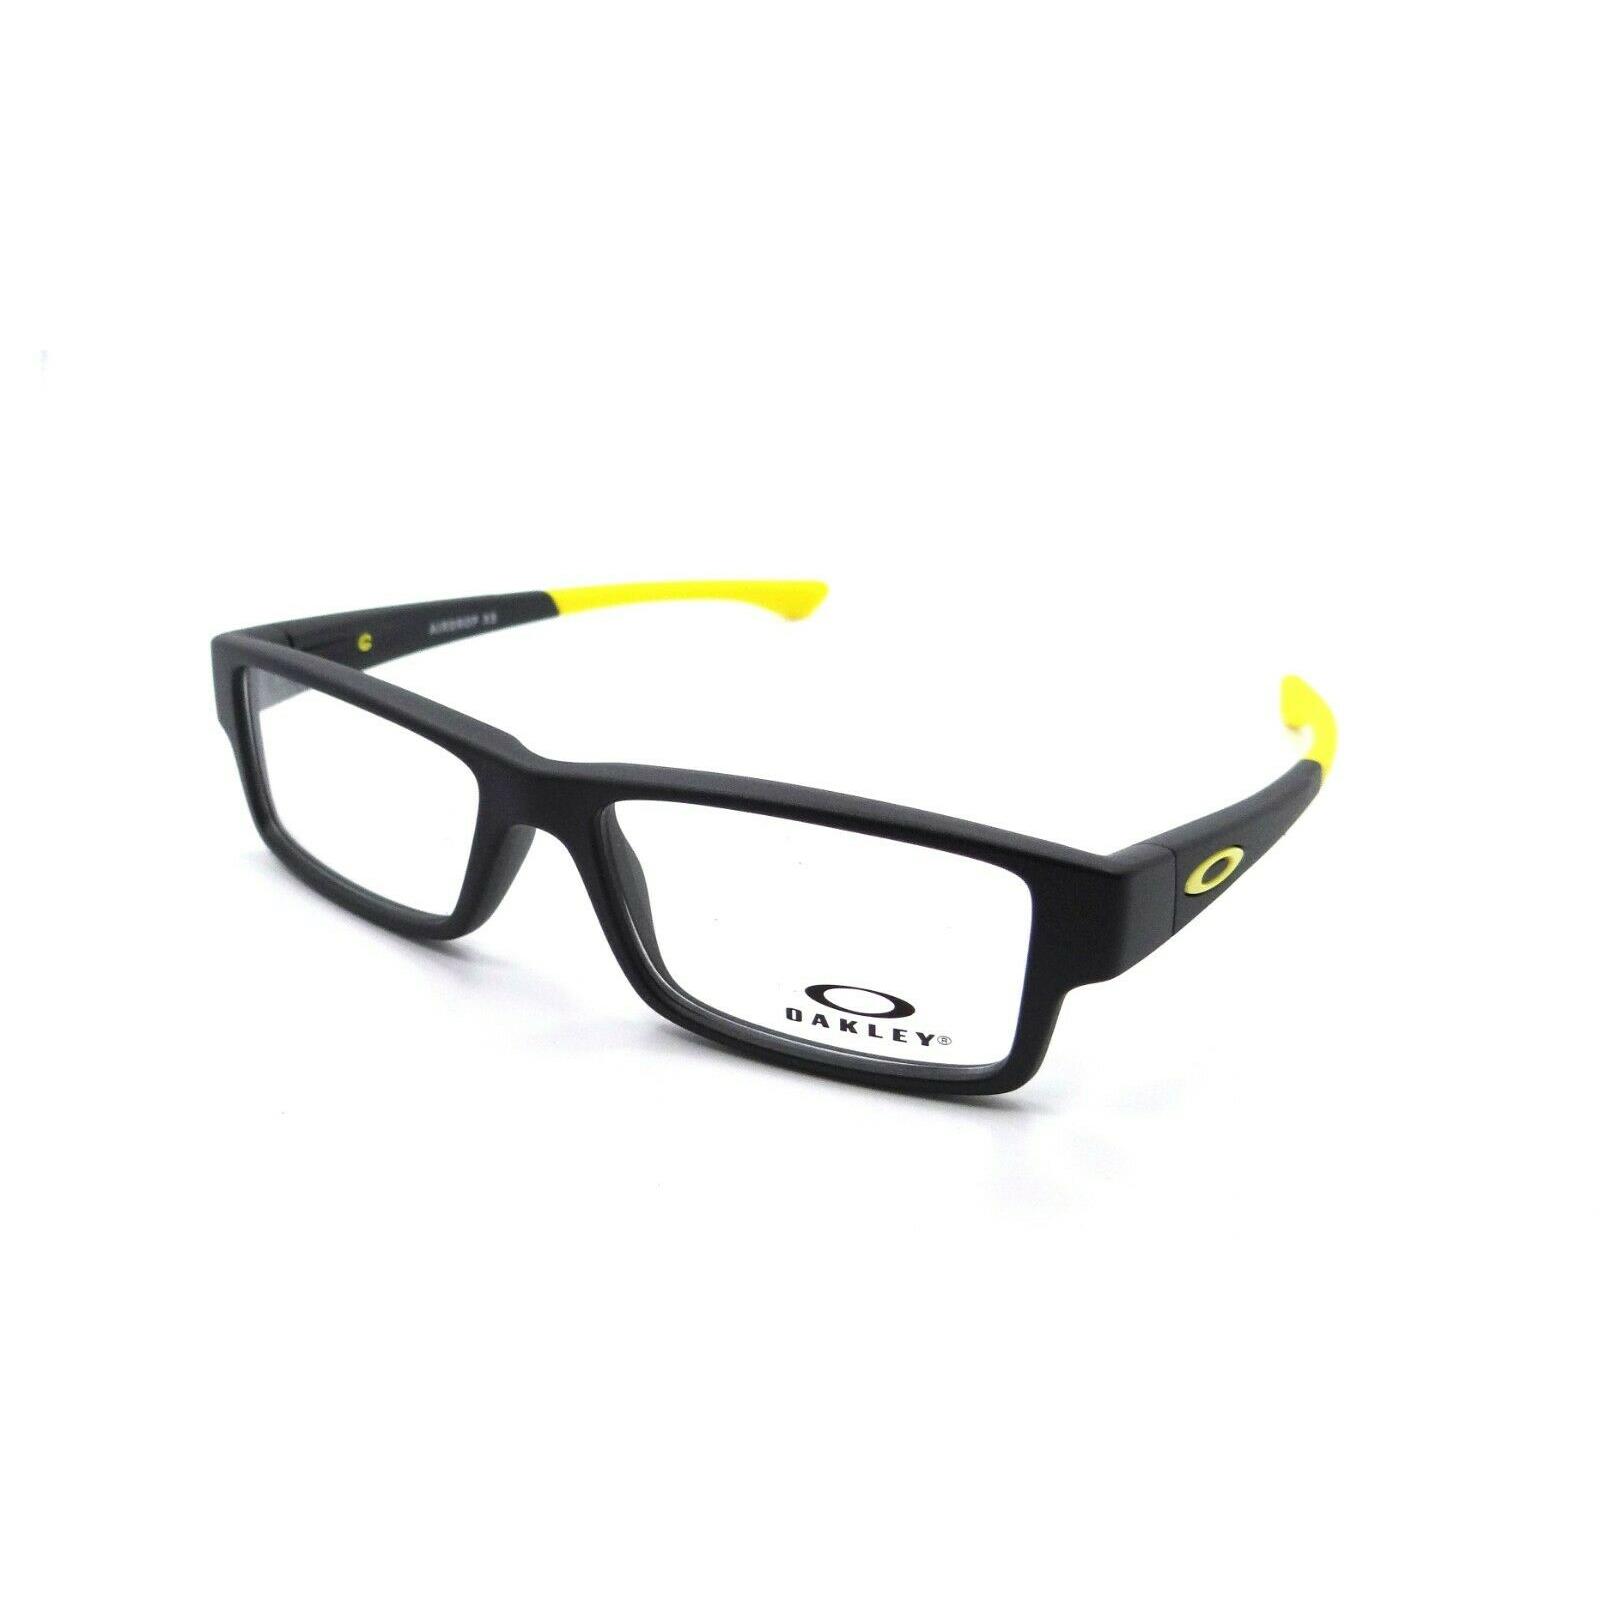 Oakley Youth Rx Eyeglasses Frames OX8003-0648 48-14-126 Airdrop XS Steel /yellow - Multi-Color Frame